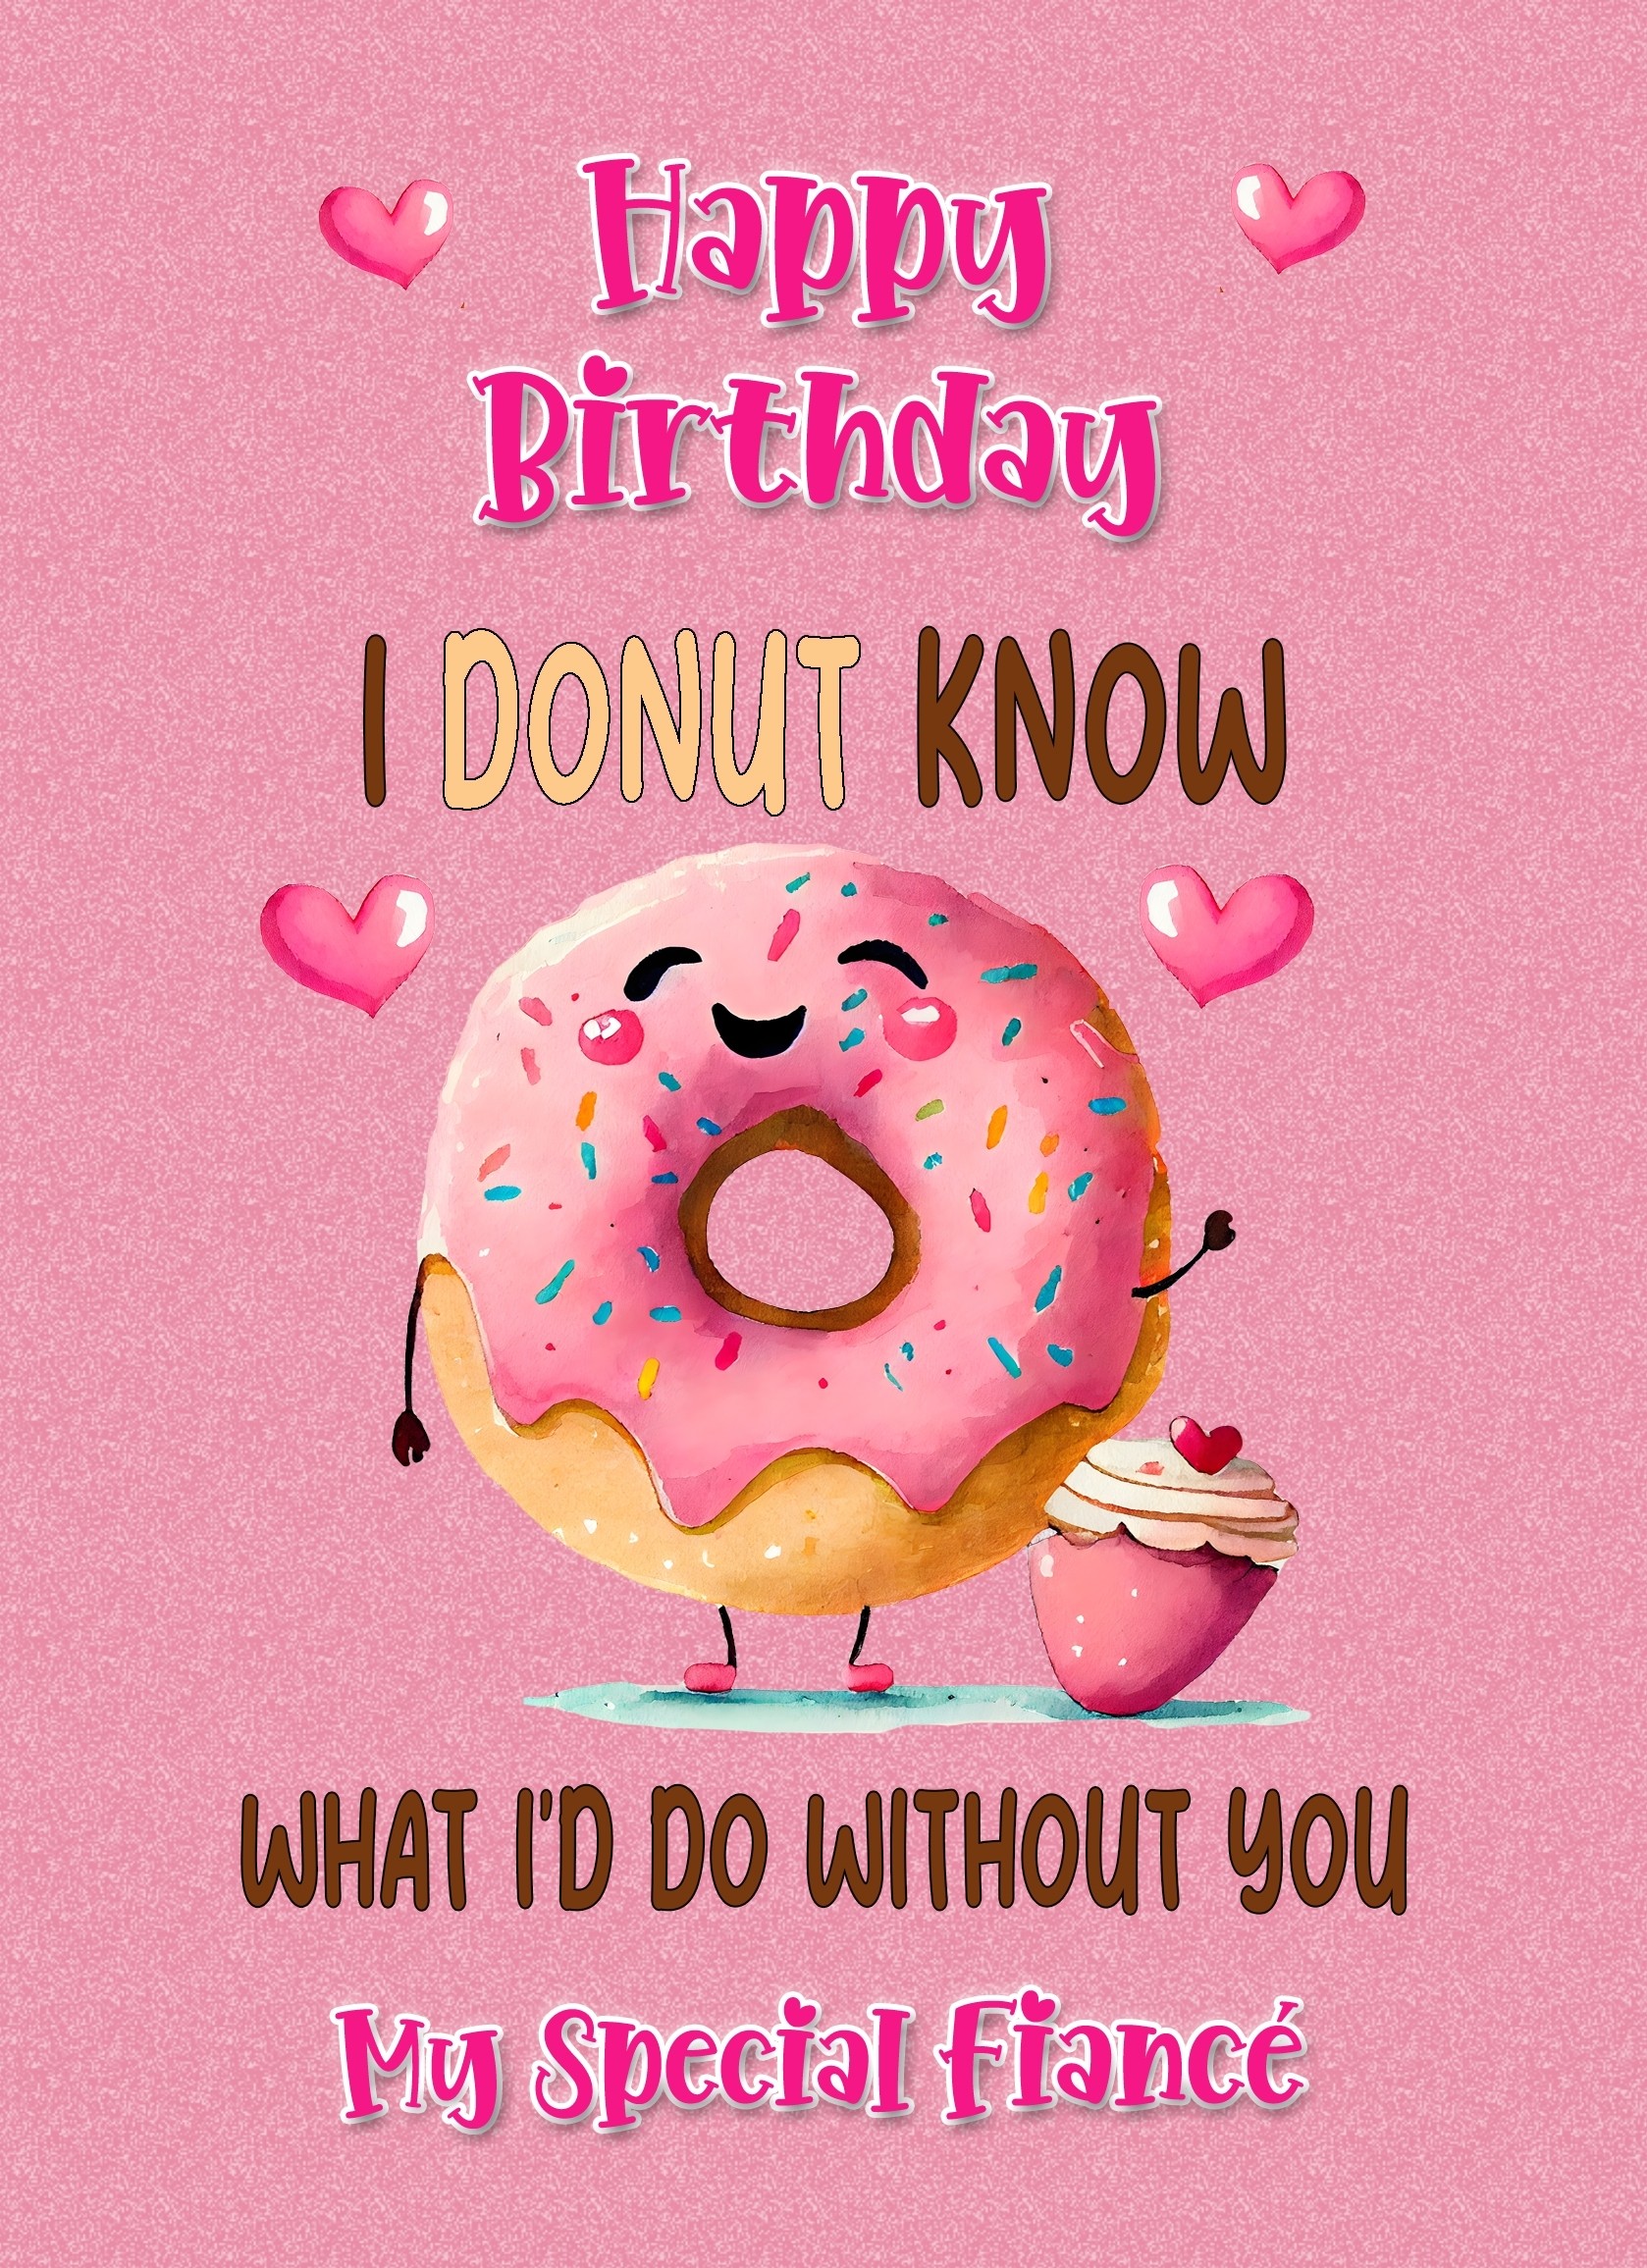 Funny Pun Romantic Birthday Card for Fiance (Donut Know)